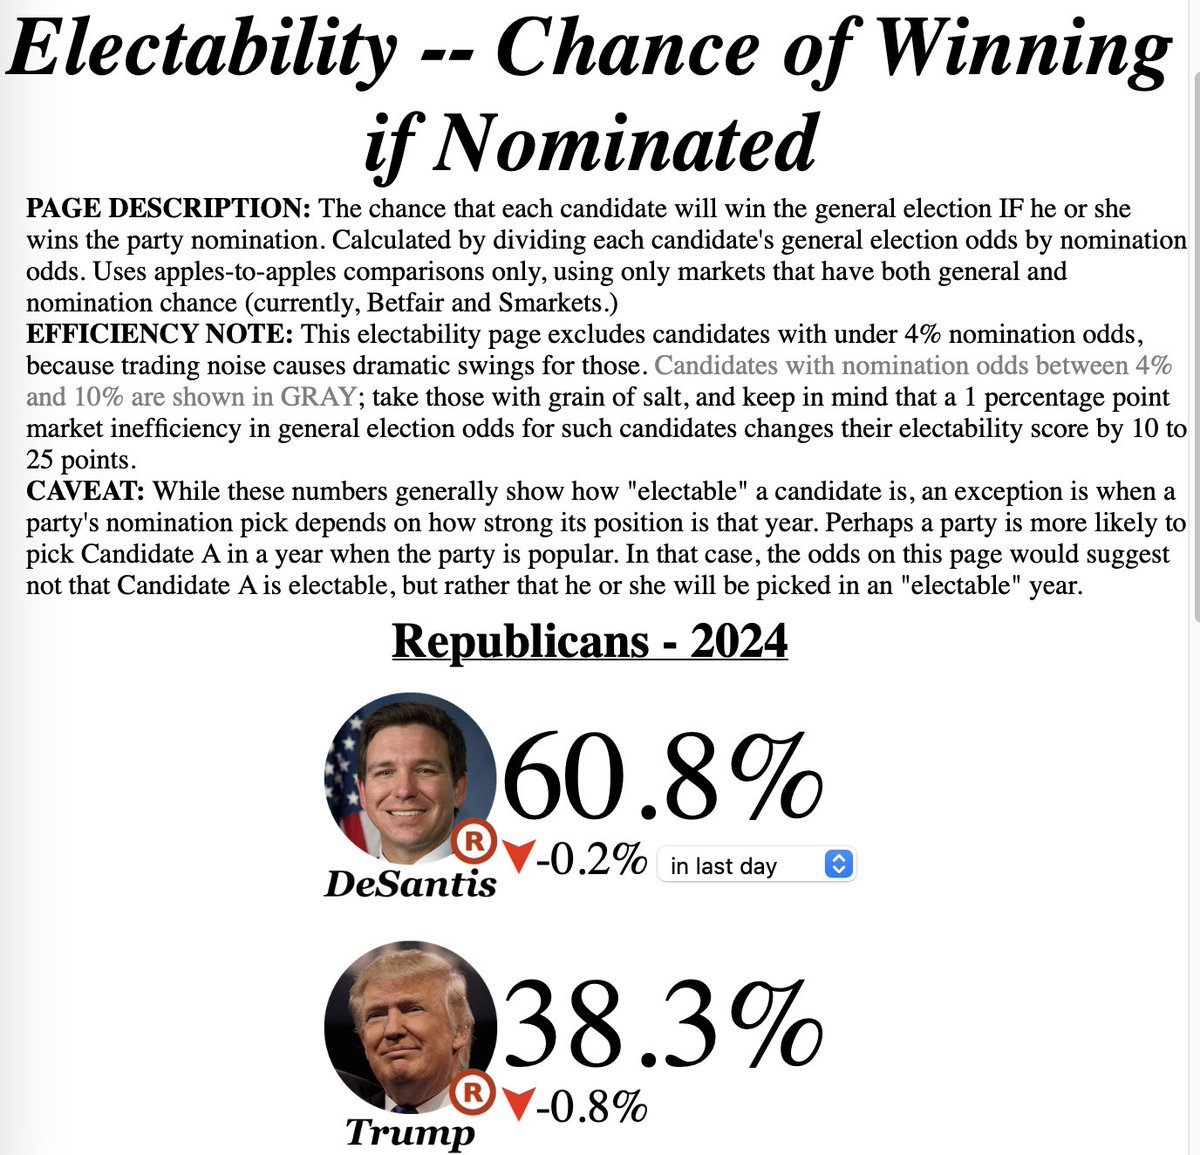 Who is the strongest Republican candidate for president?
electionbettingodds.com/ElectabilityGO…